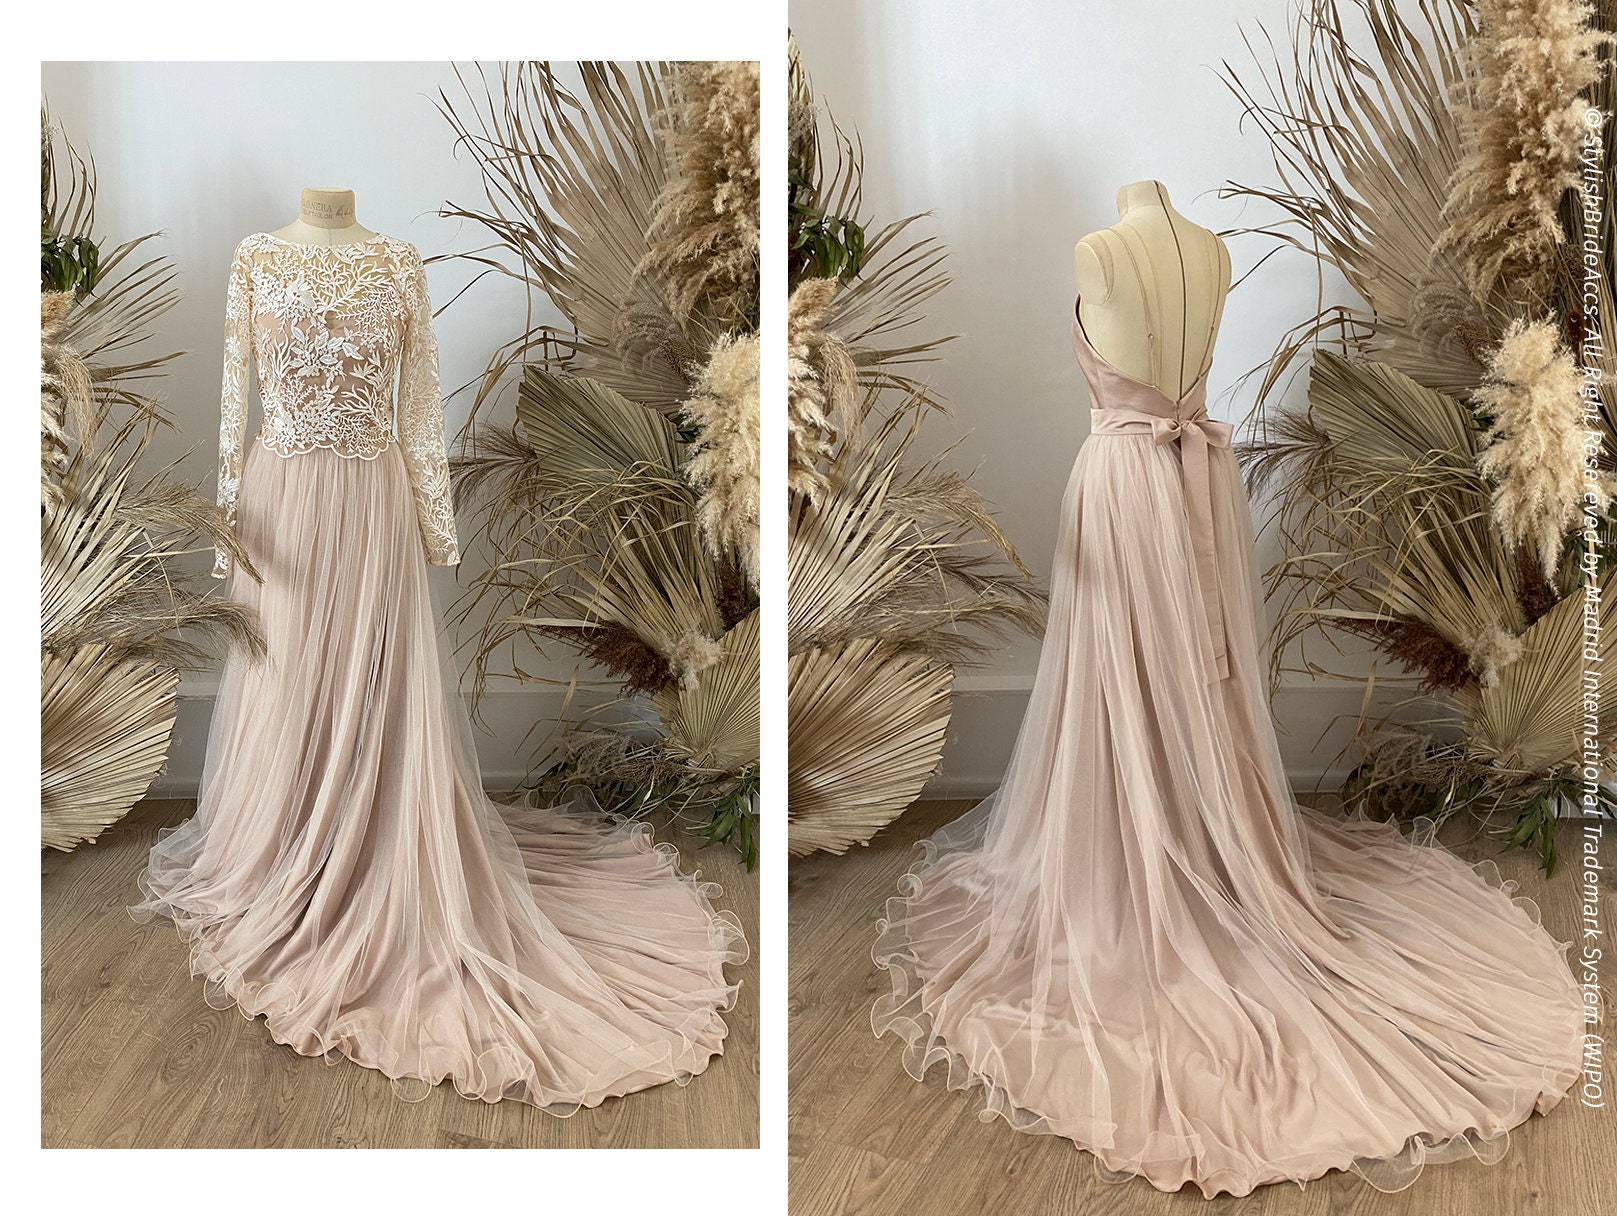 Pastel Light Pink or Nude Beige Sleeveless Lace Applique Ball Gown